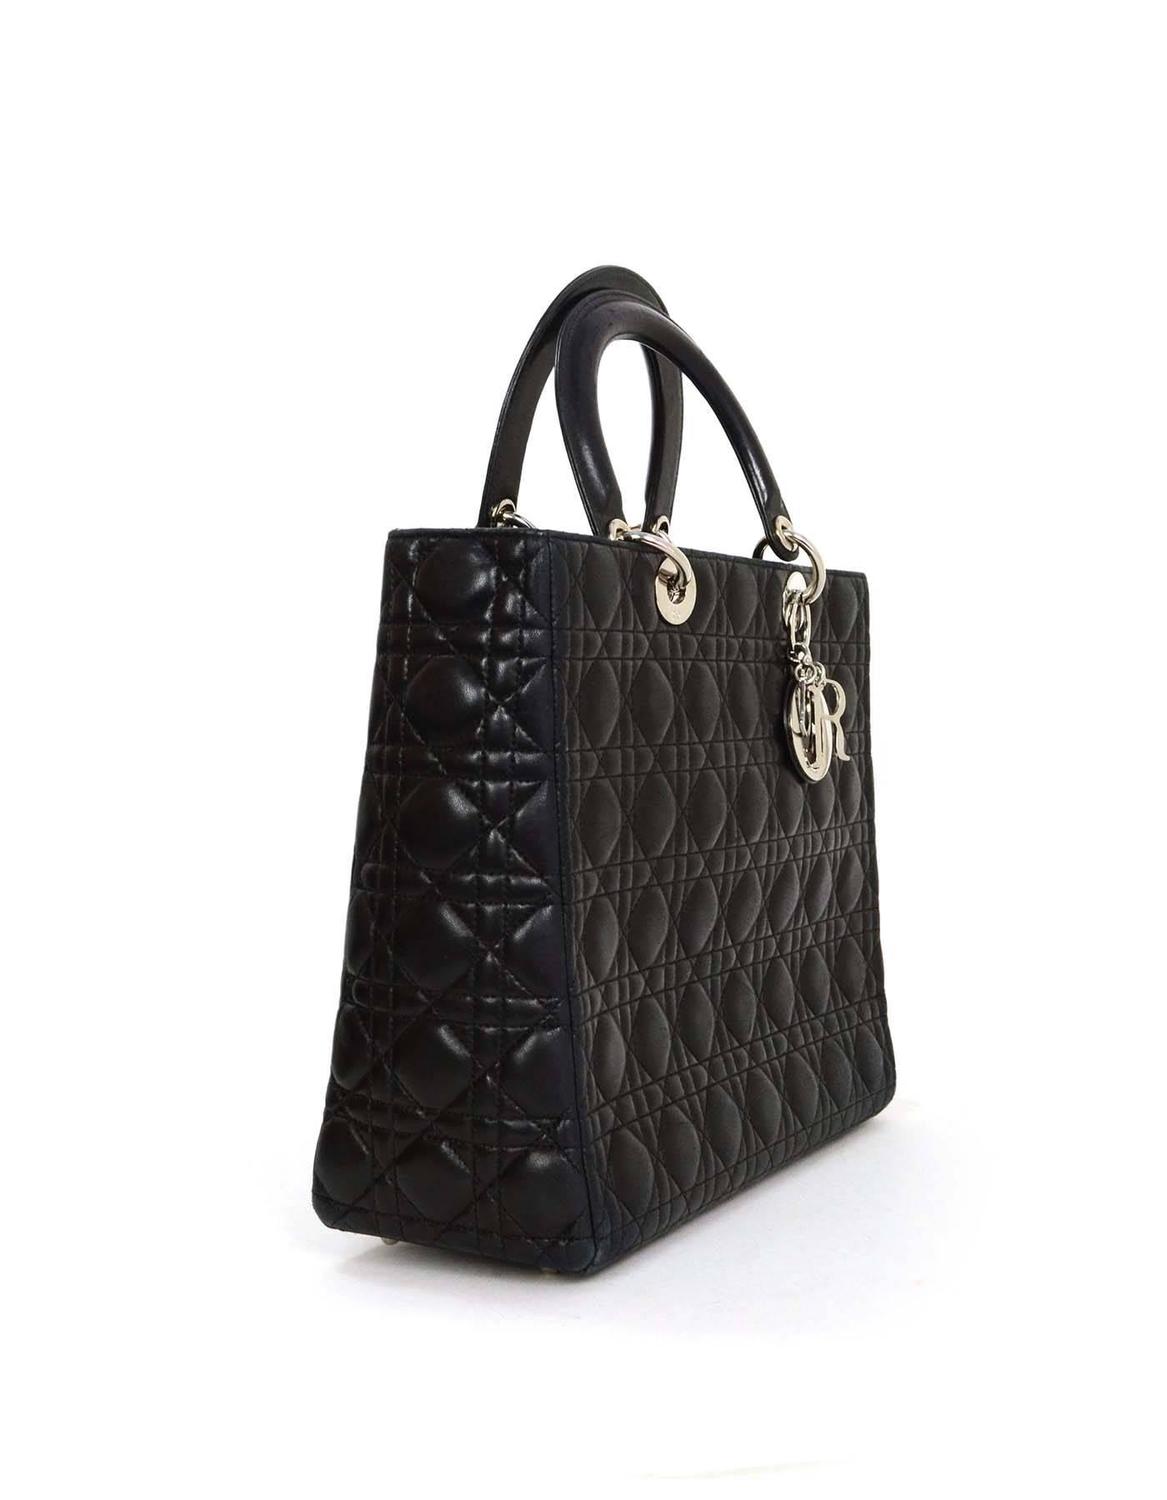 Christian Dior Black Quilted Leather Large Lady Dior Tote Bag SHW at 1stdibs